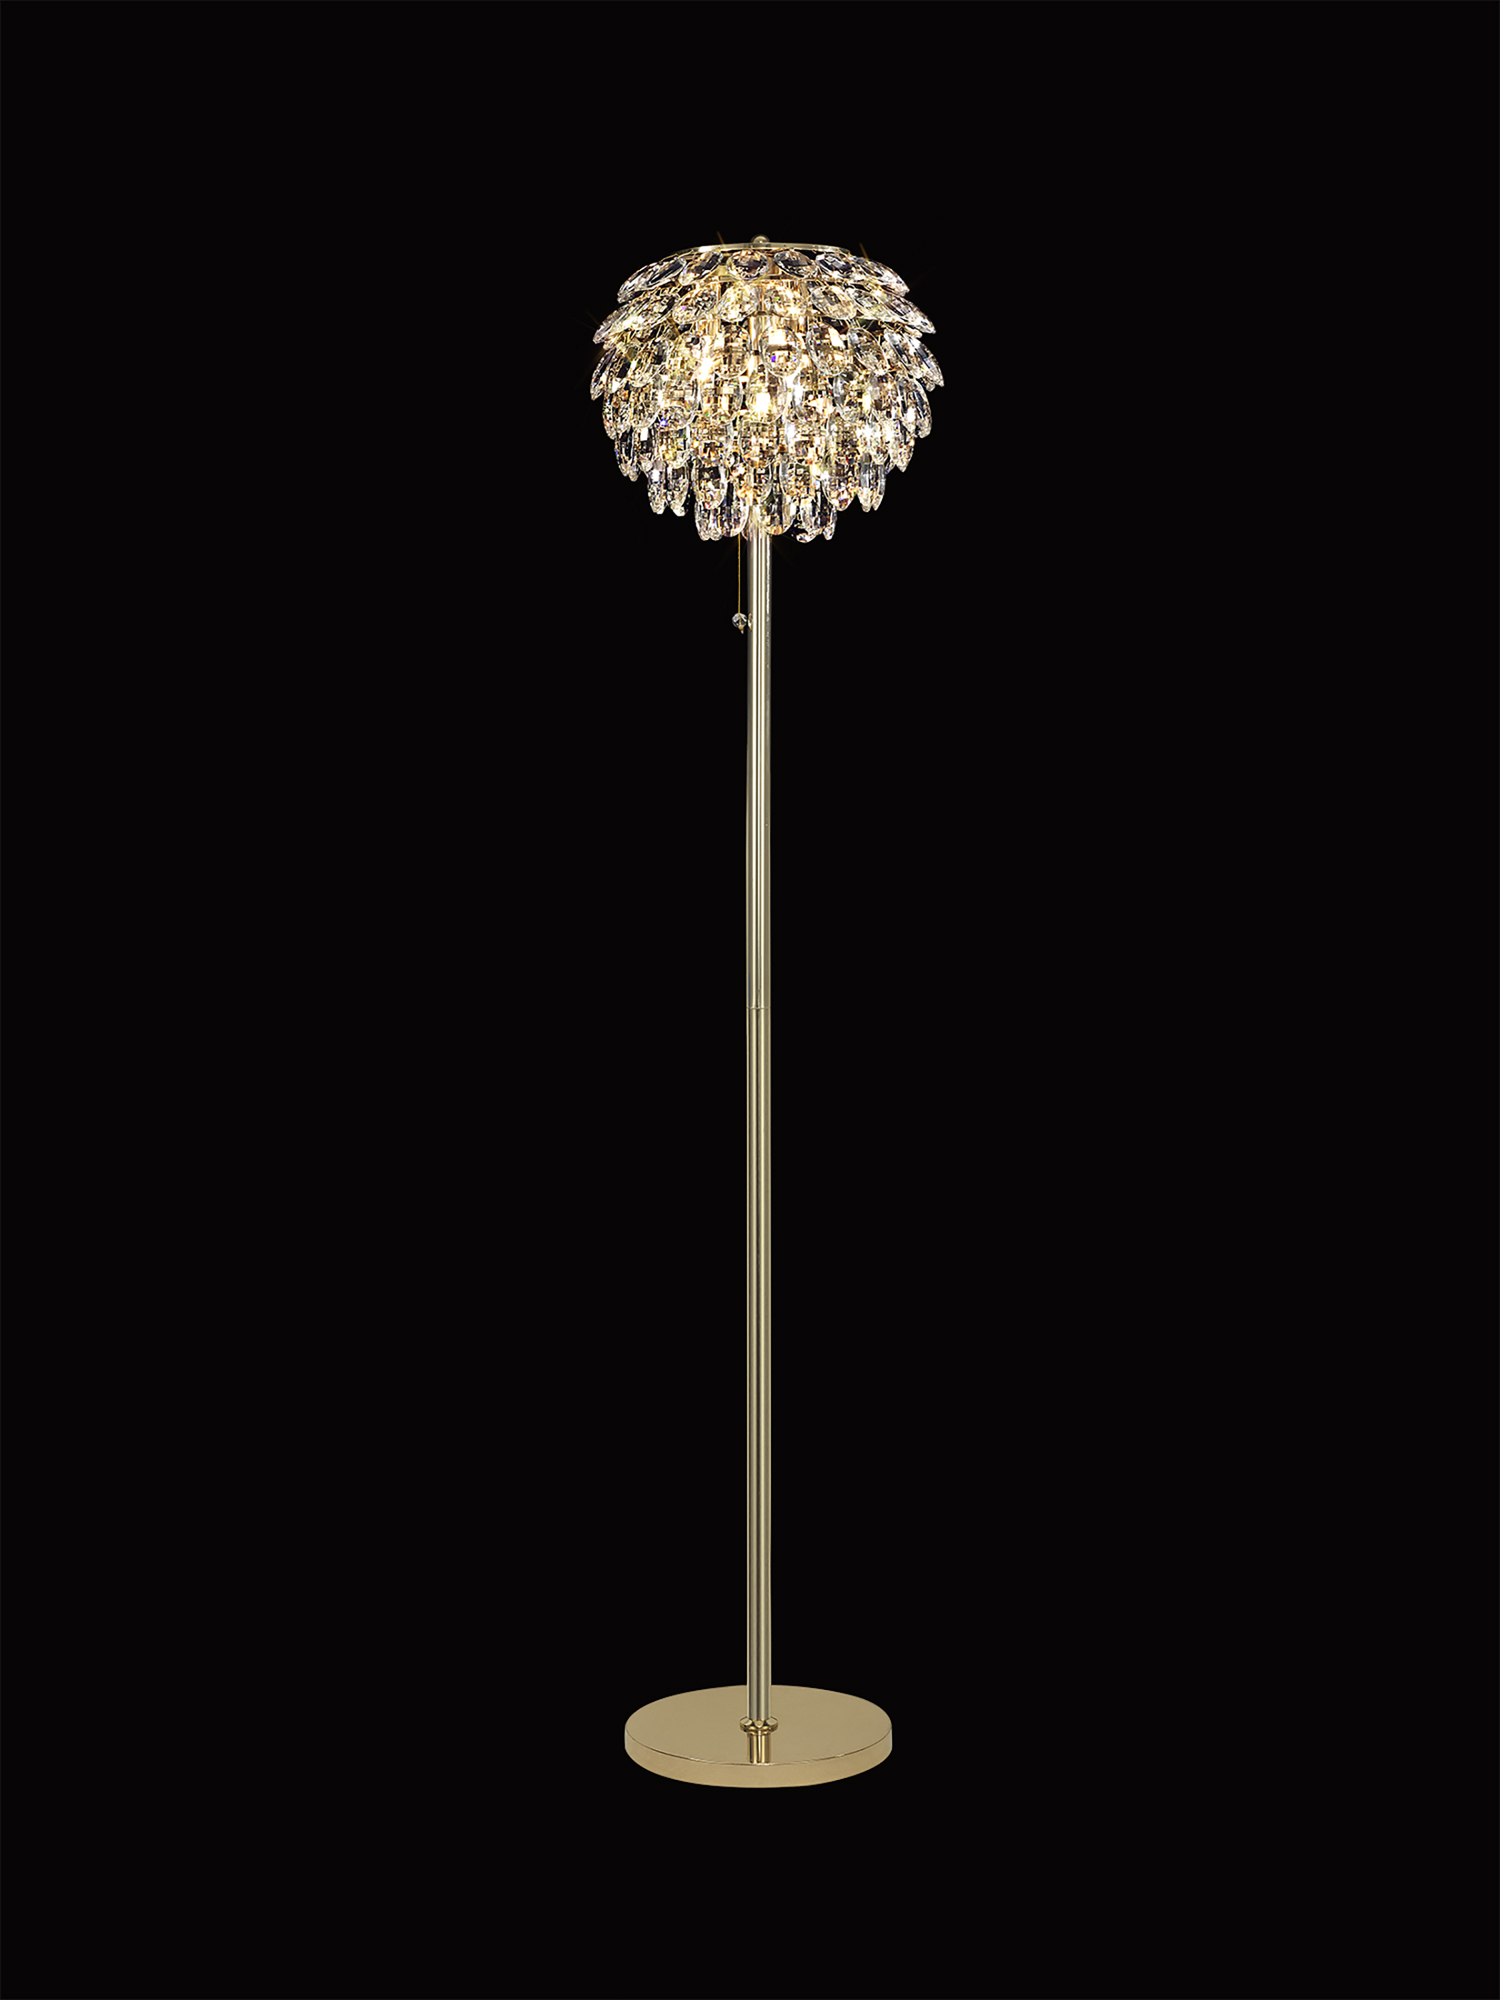 Coniston French Gold Crystal Floor Lamps Diyas Designer Floor Lamps 